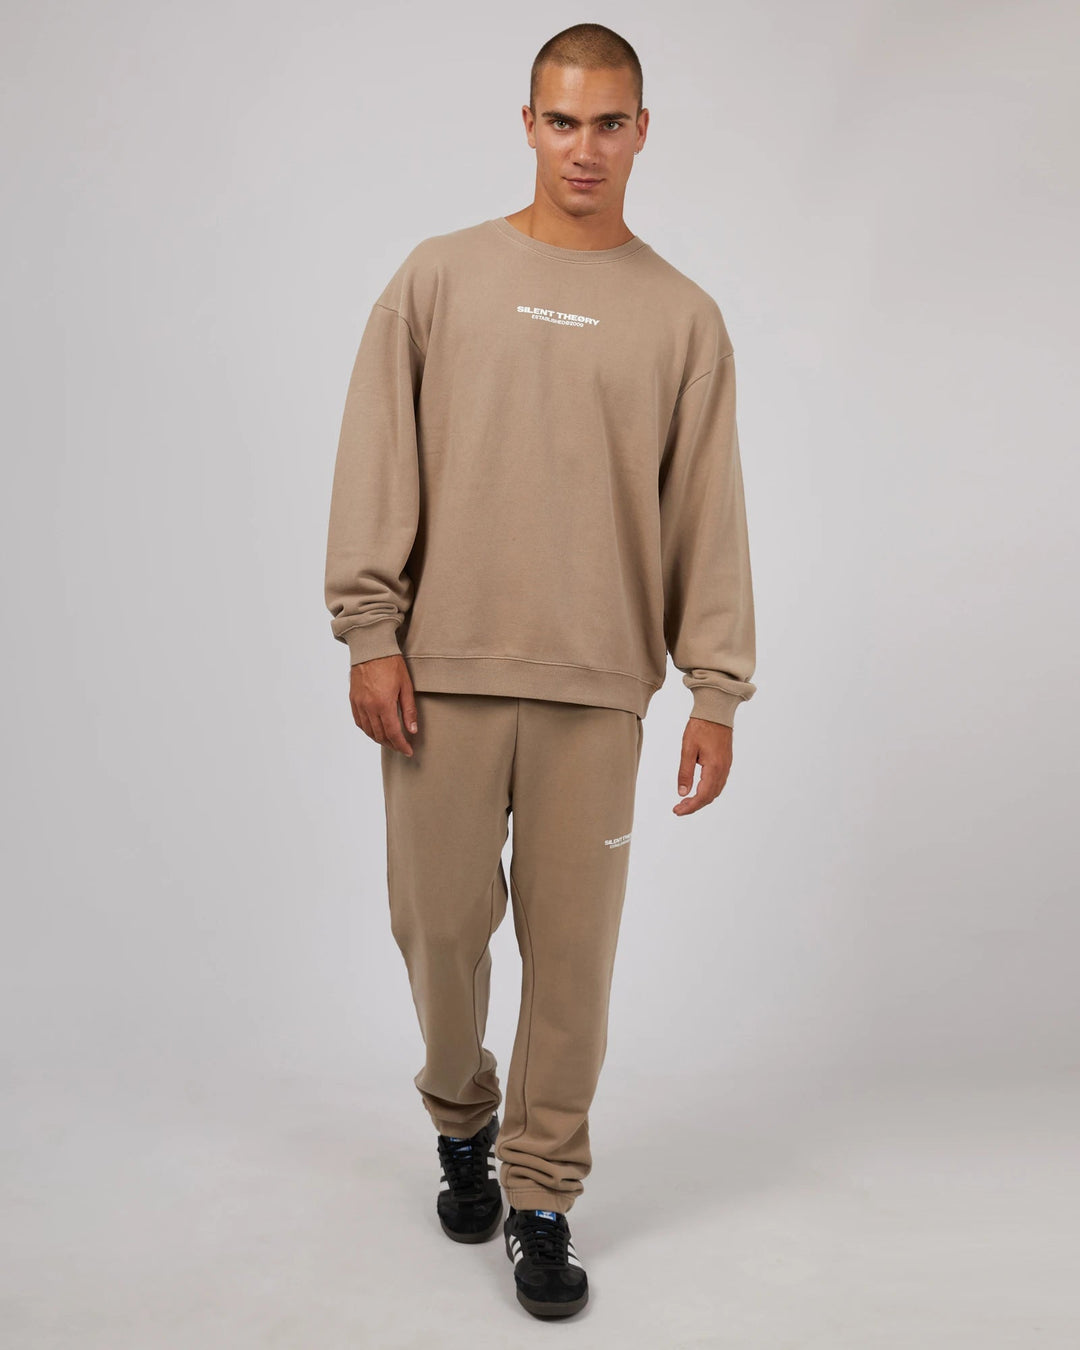 Essential Theory Track Pant - Tan - Chillis & More NZ